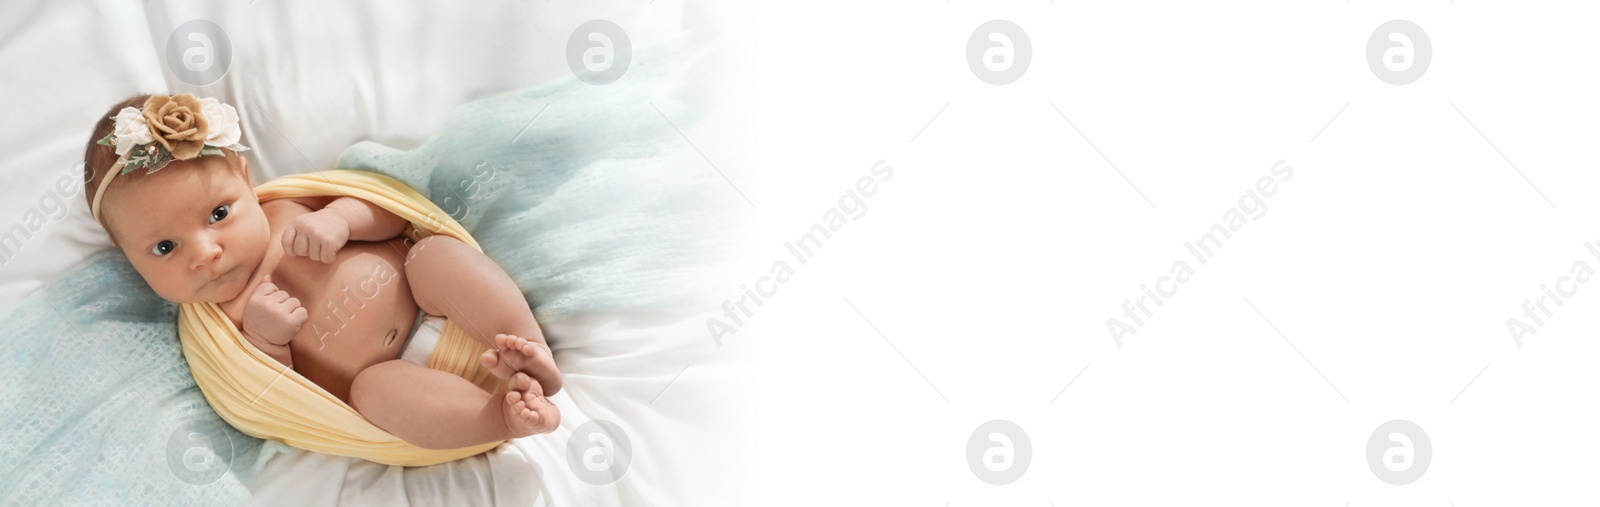 Image of Adorable newborn baby on bed, top view with space for text. Banner design